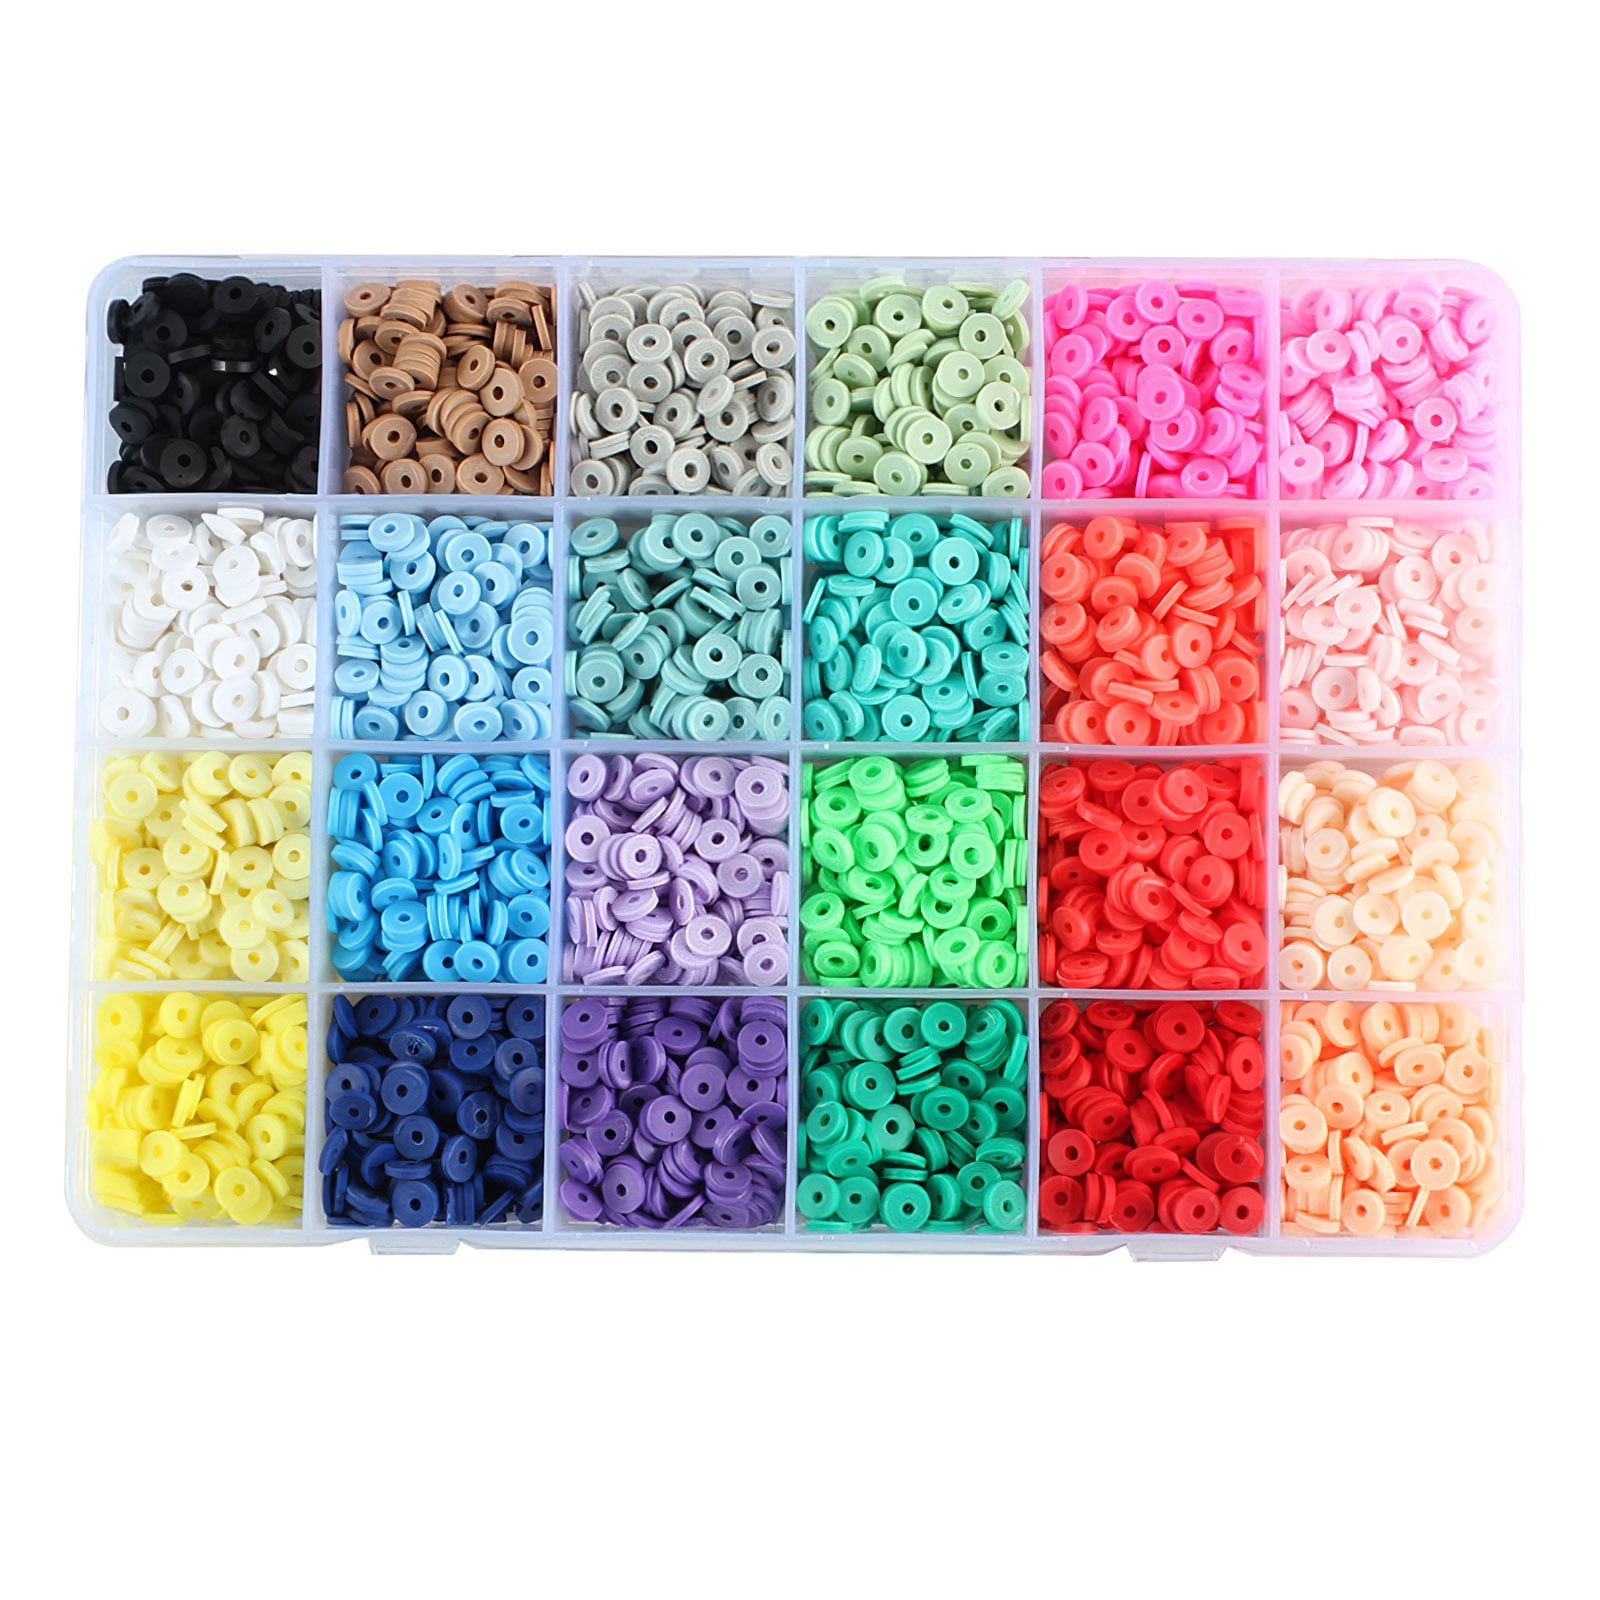 Beirui 4184 Pcs Bracelet Making Kit Polymer Clay Beads 18 Colors DIY Gift  for Girls Jewelry Making 